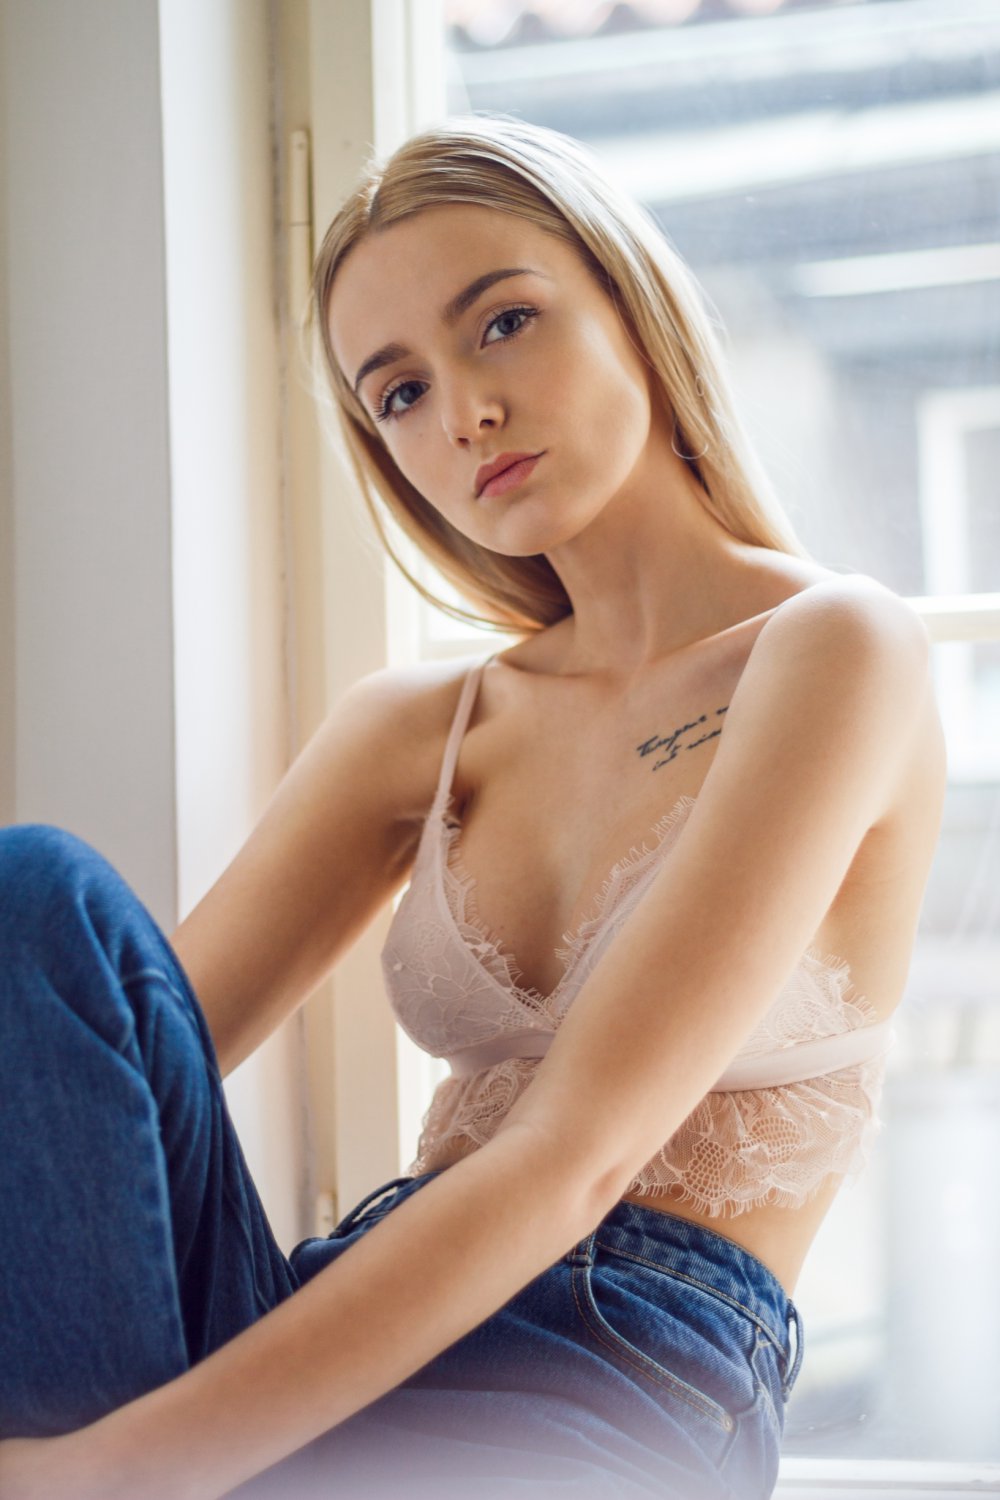 How to wear the bralette?